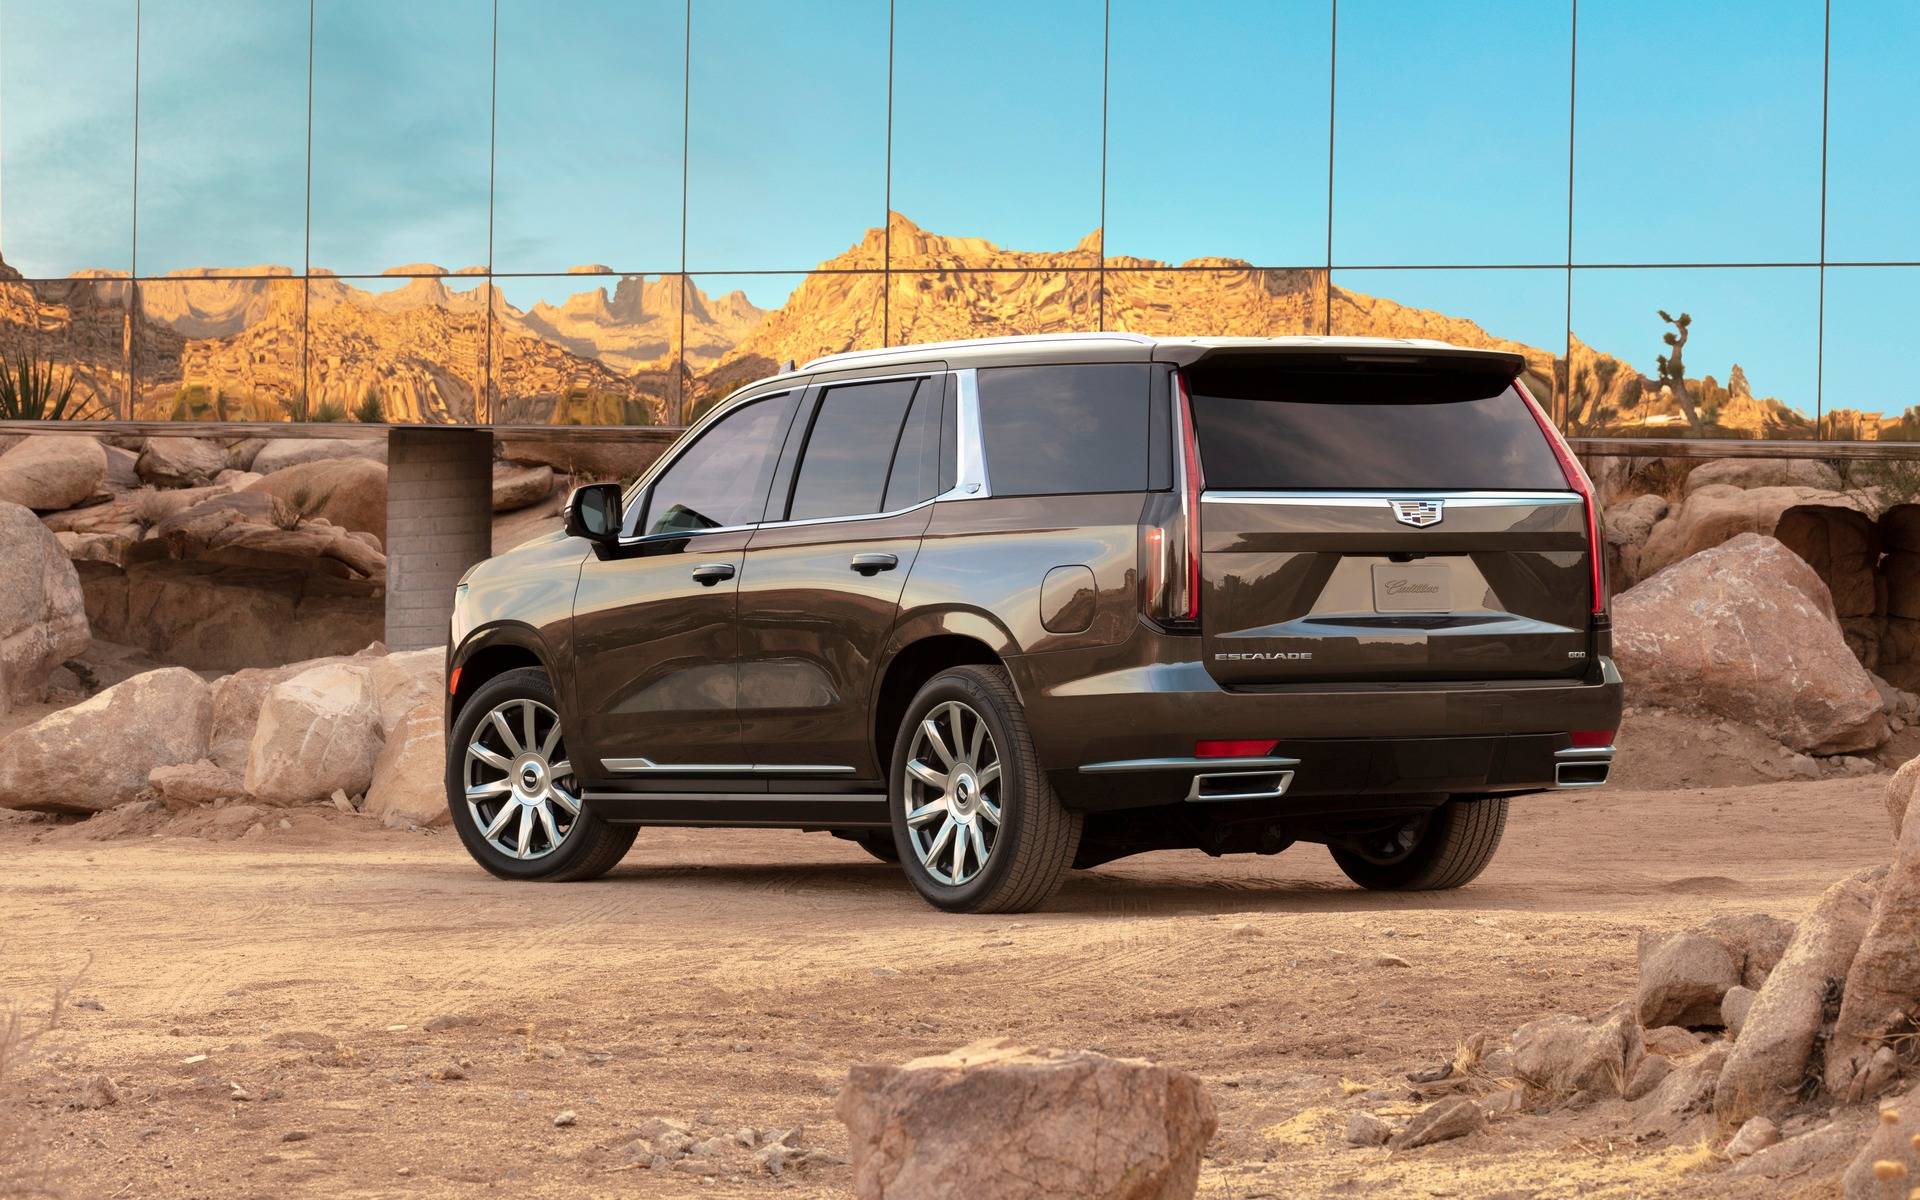 Cadillac Escalade Pricing and Equipment Details Unveiled Car Guide